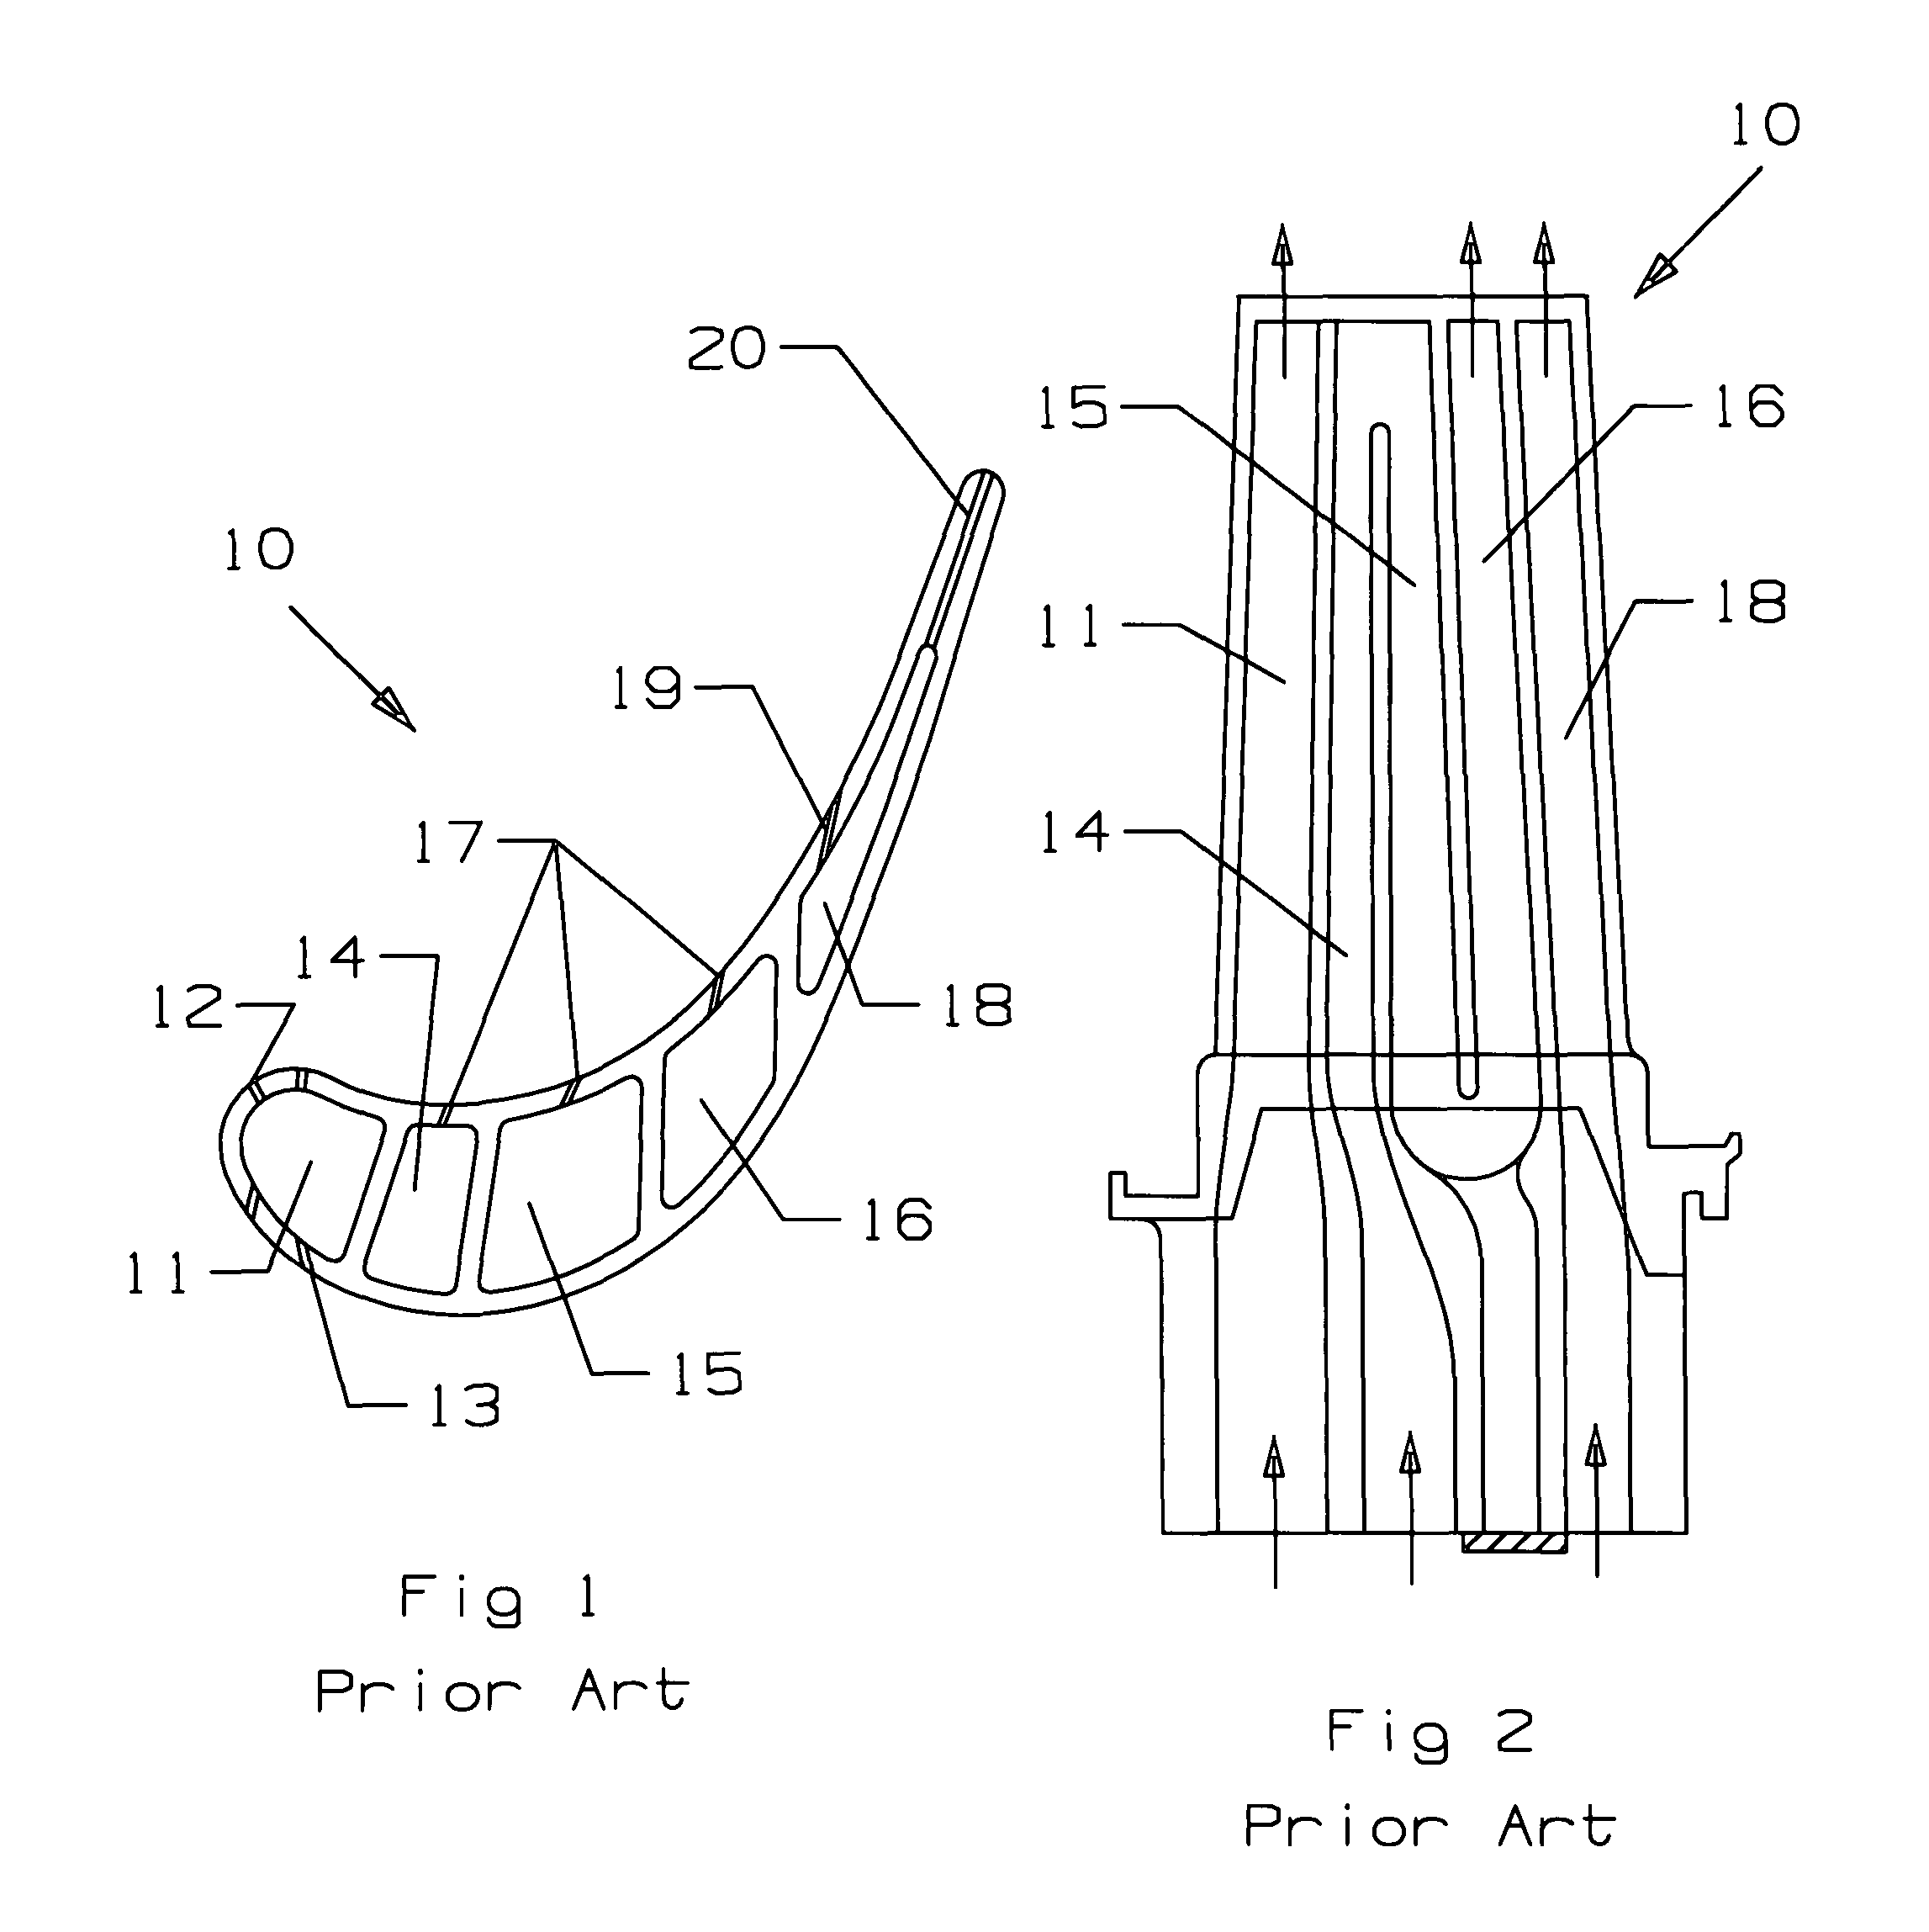 Turbine airfoil with near-wall serpentine cooling